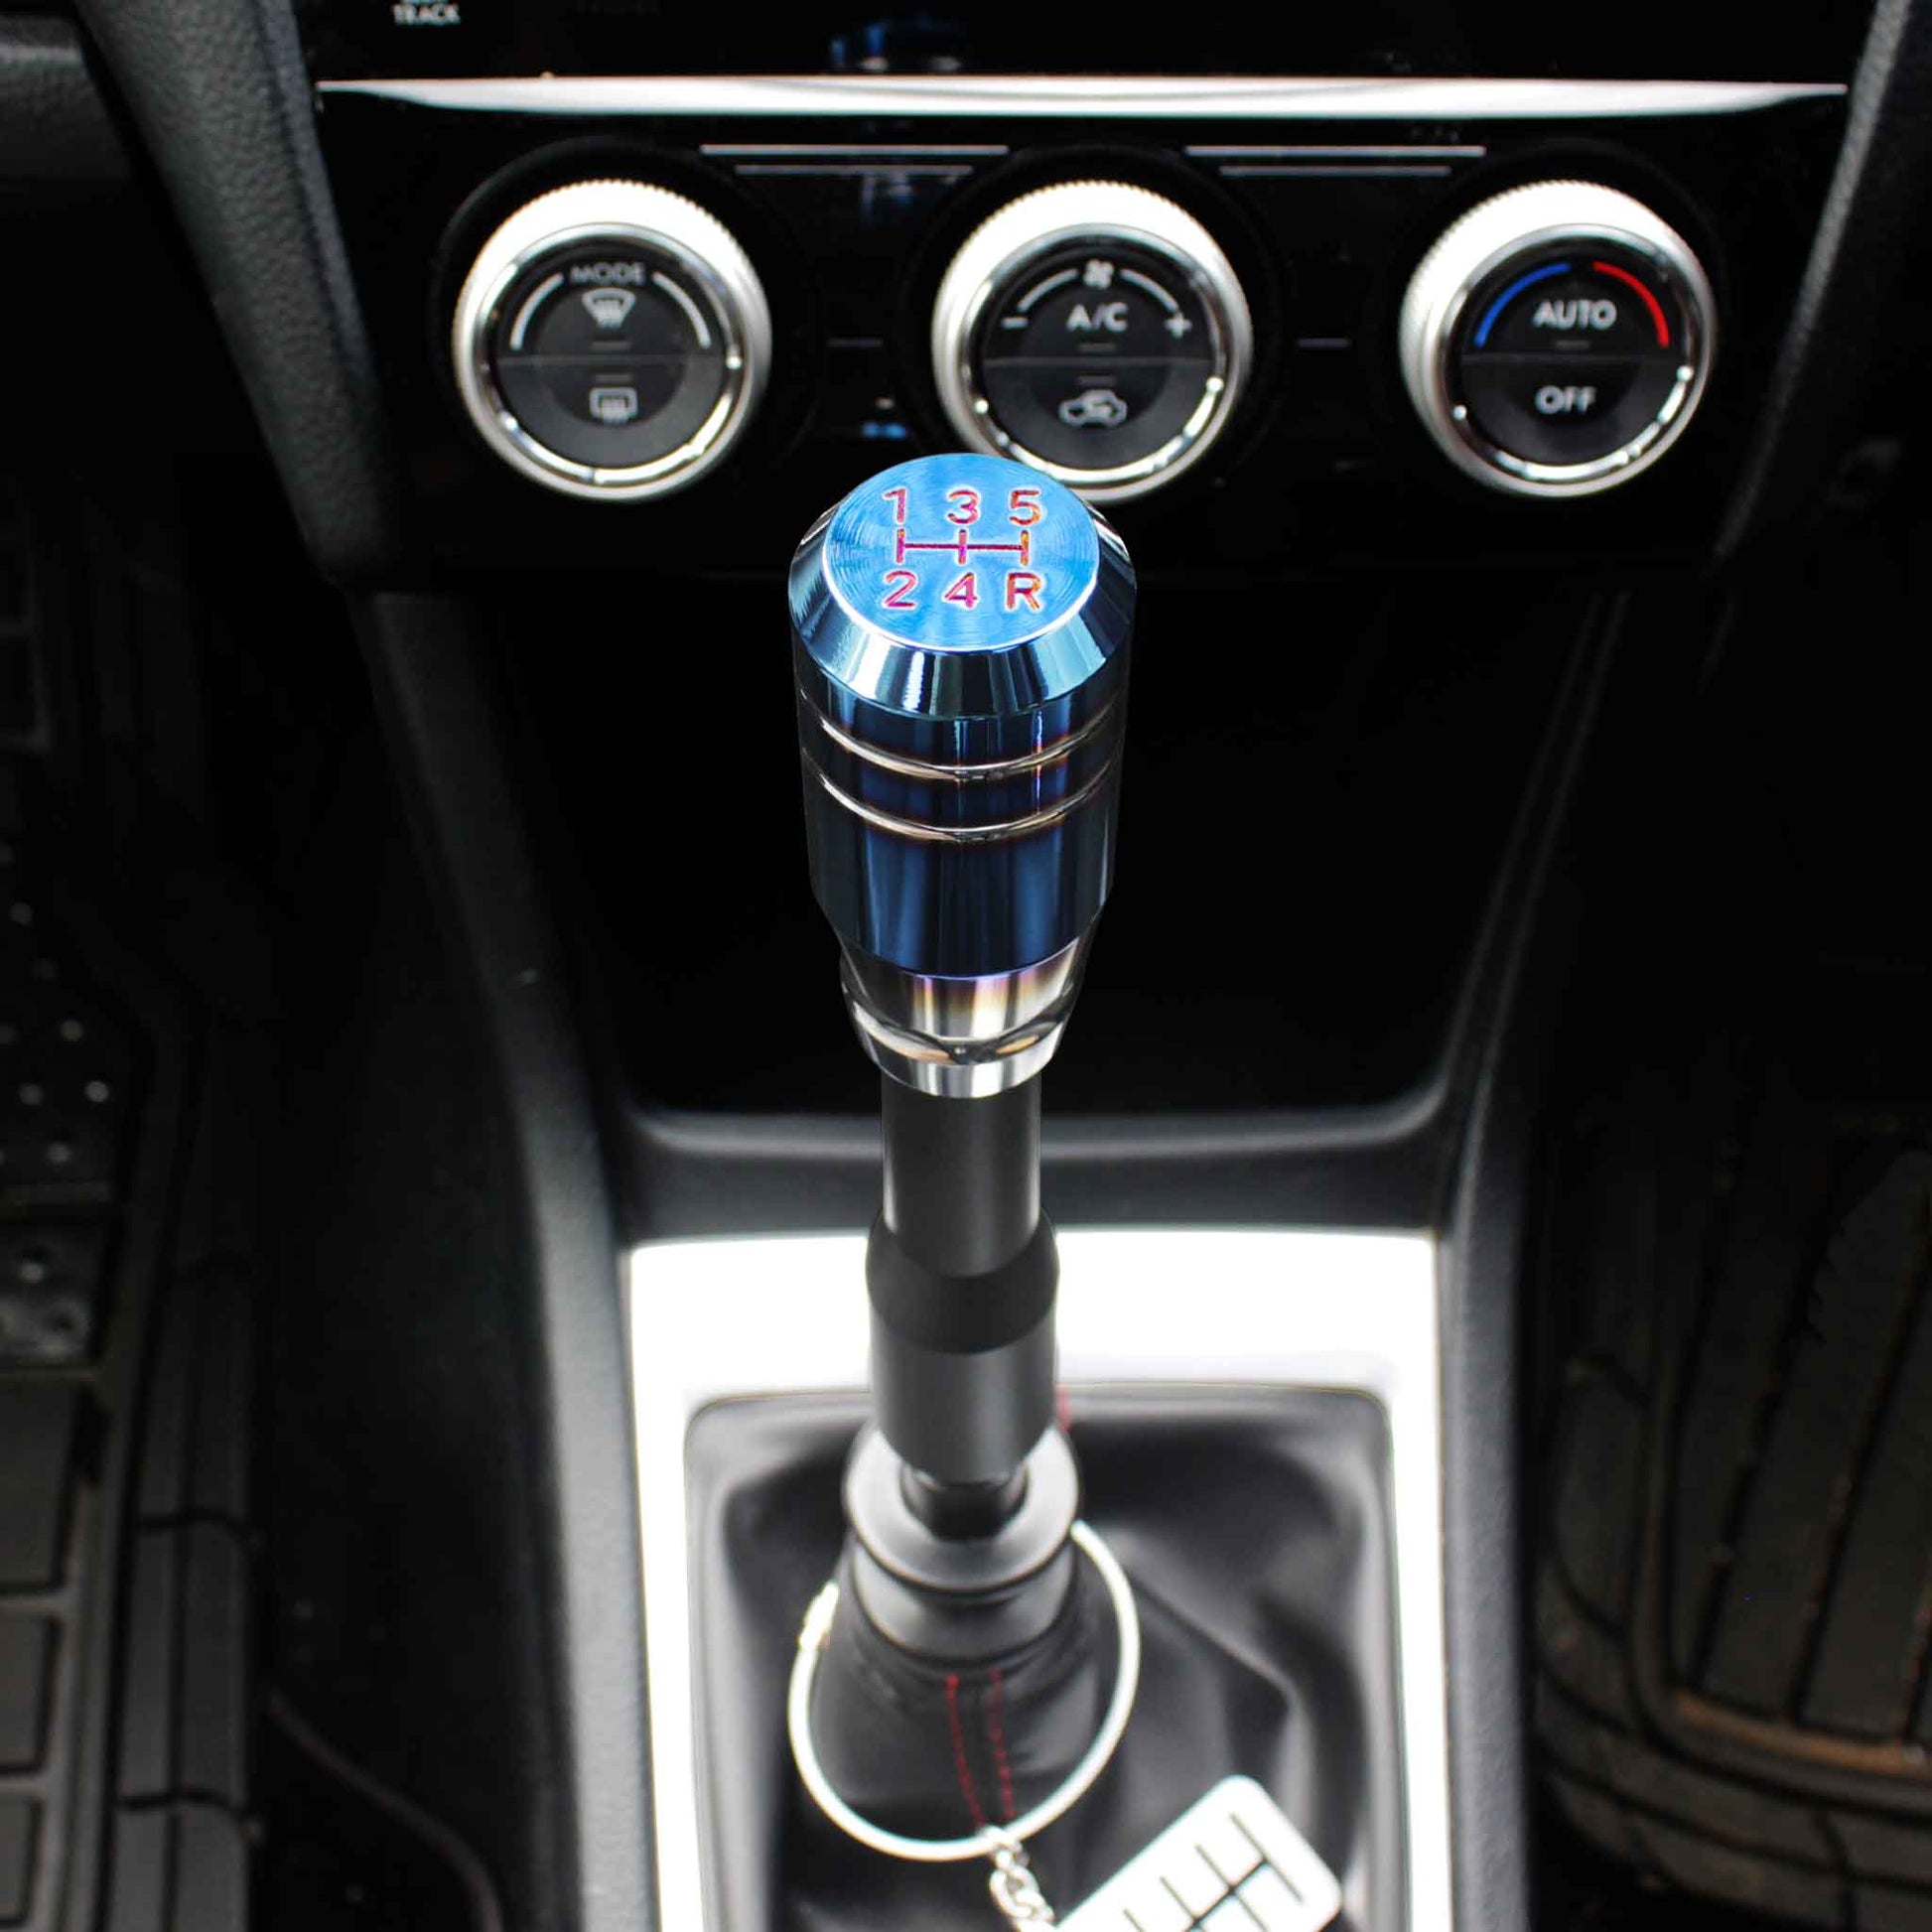 A burnt blue shift knob is installed on a manual WRX with an extension between the knob and the shift boot, and a six-speed dog-tag is hanging around the shift boot